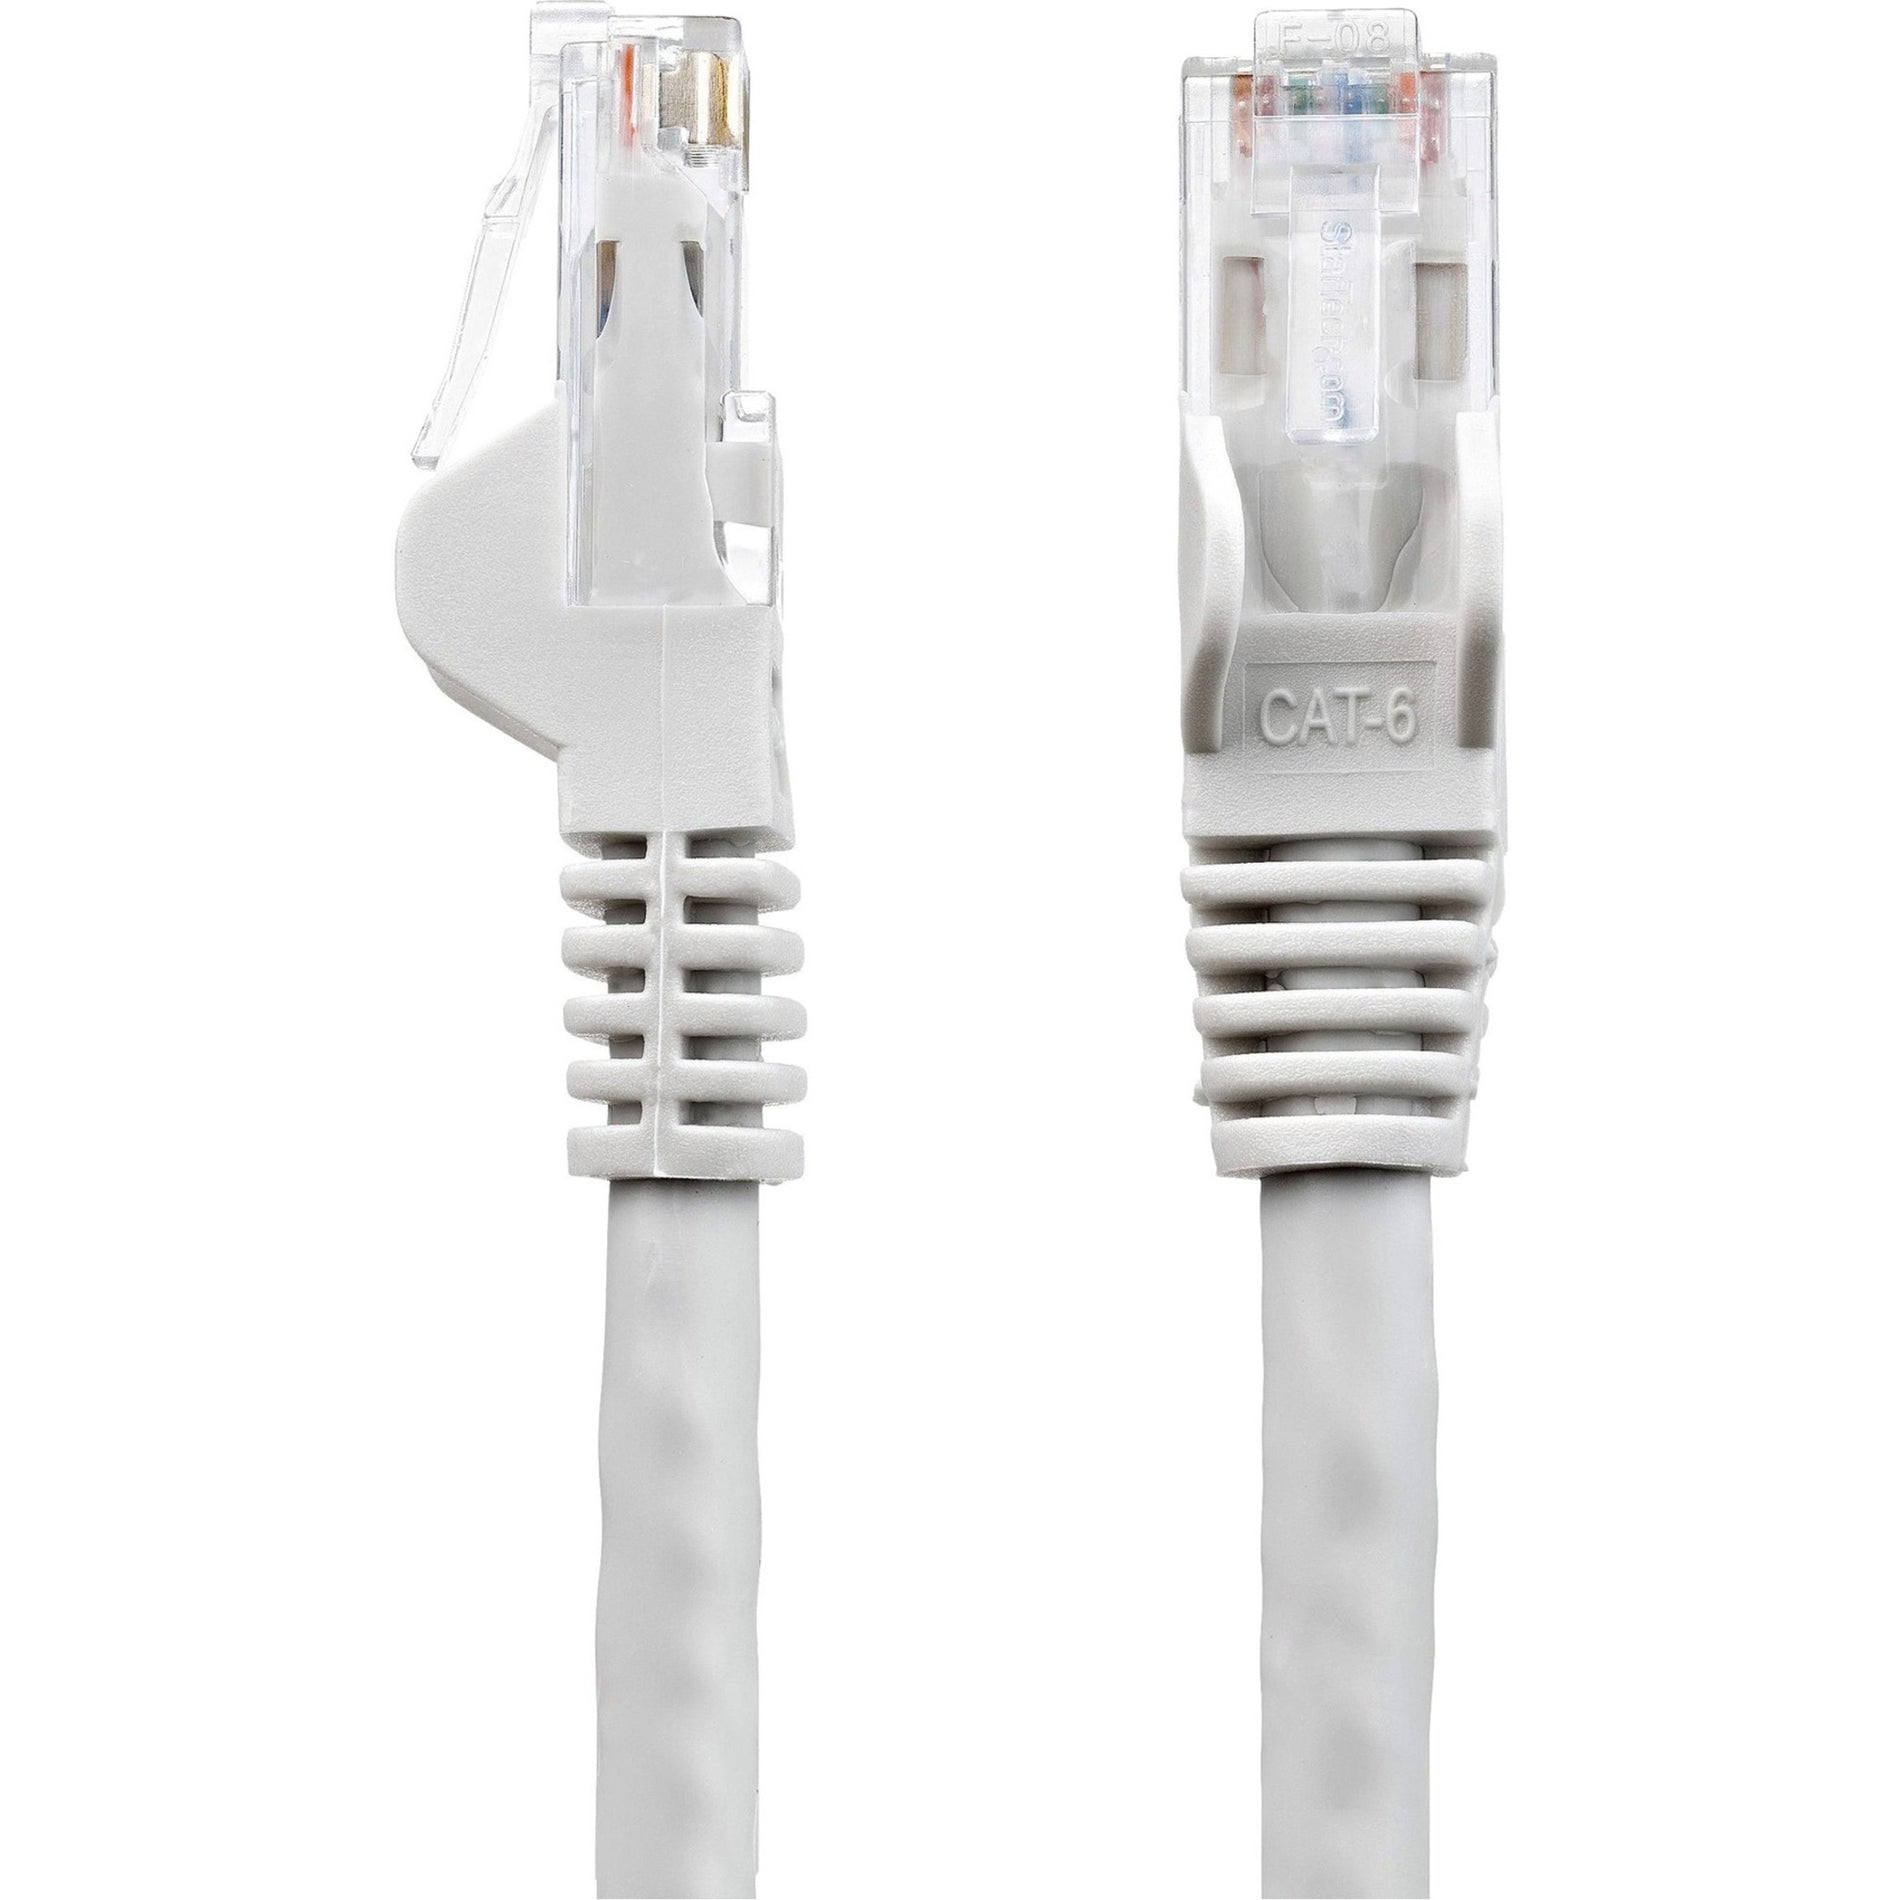 StarTech.com N6PATCH125GR Cat6 Patch Cable with Snagless RJ45 Connectors - Long Ethernet Cable, 125 ft Gray Cat 6 UTP Cable